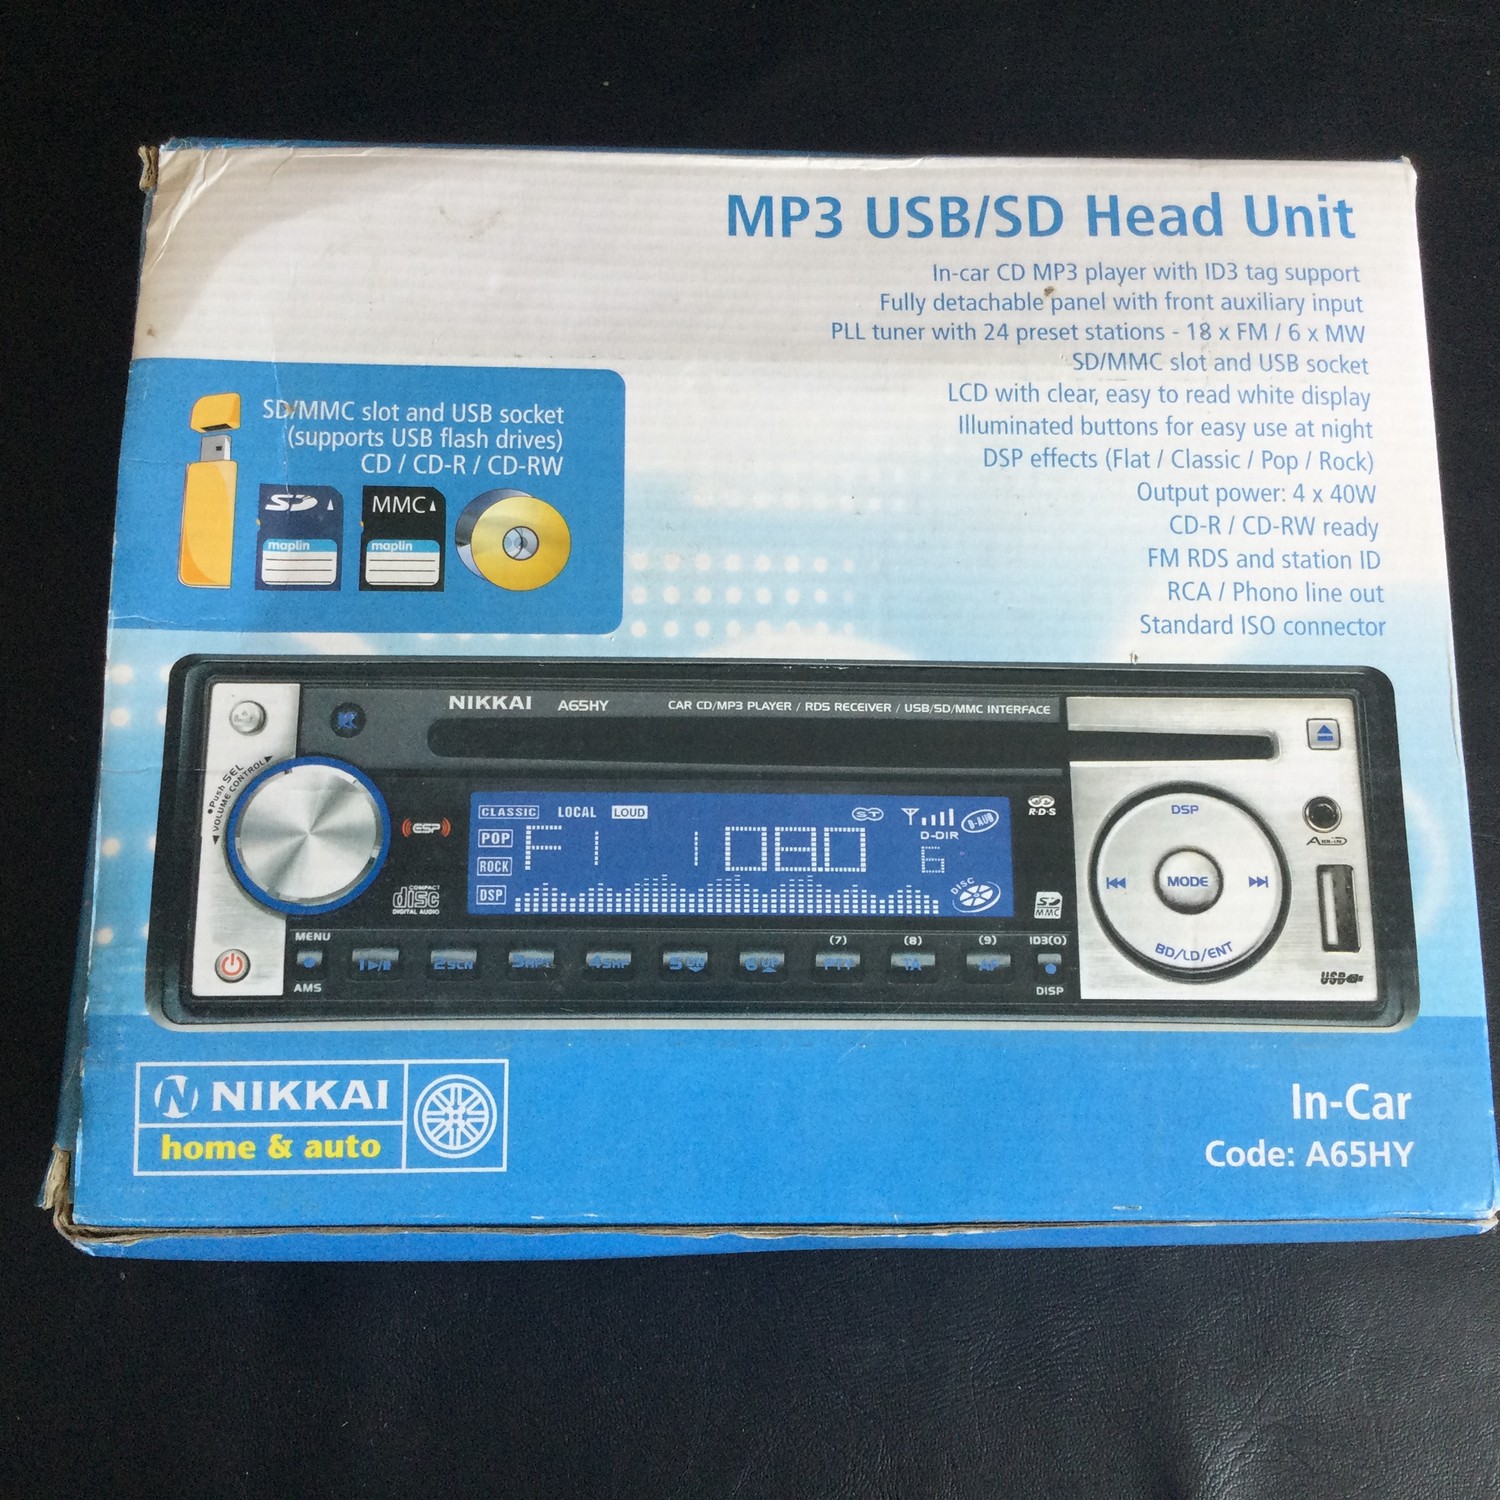 NIKKAI A64HY CAR STEREO. This head unit is model number A64HY and incorporates MP3 / USB/SD / CD and